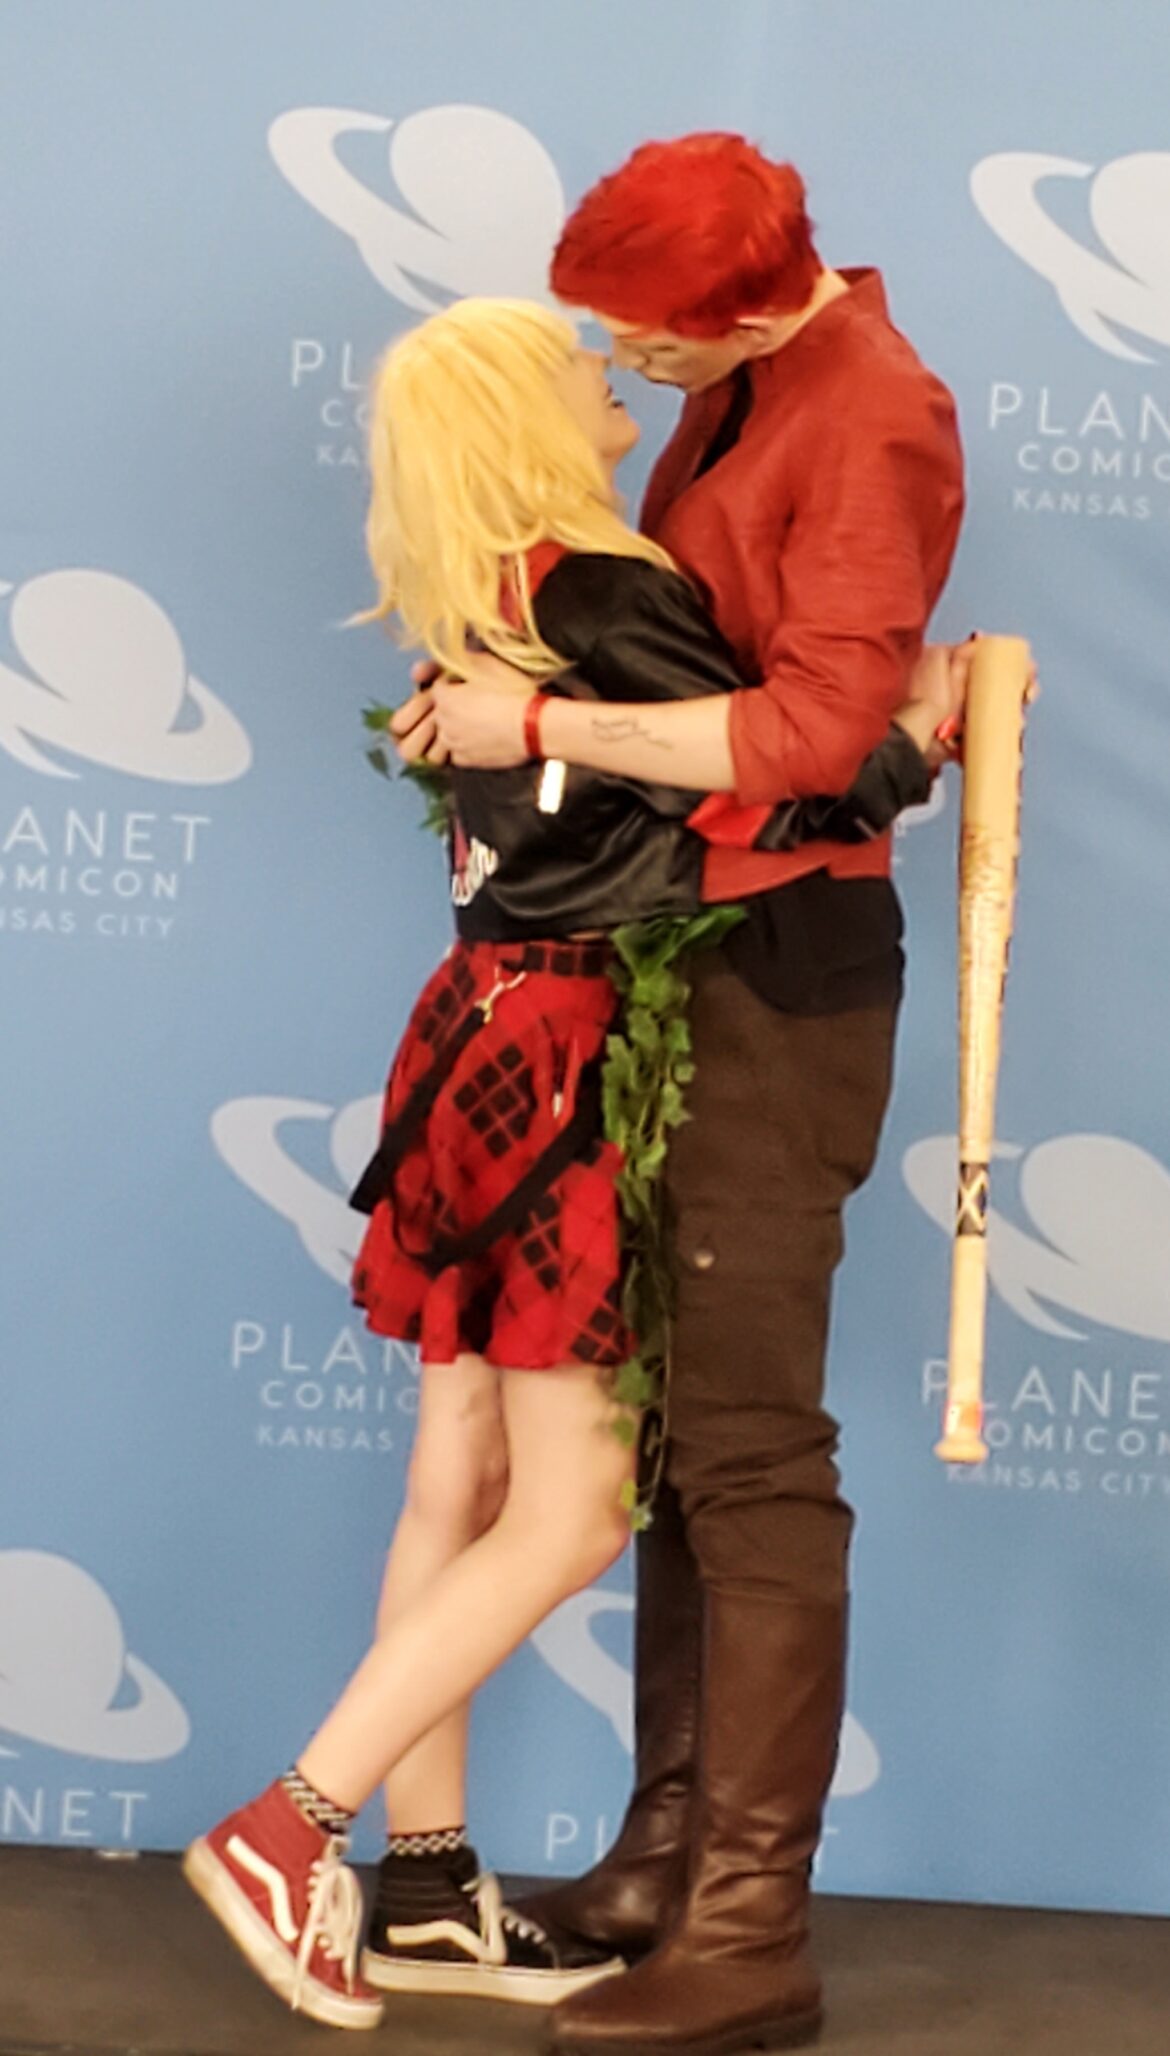 Marriage Proposal At DC Cosplay Meet Up @ Planet Comicon